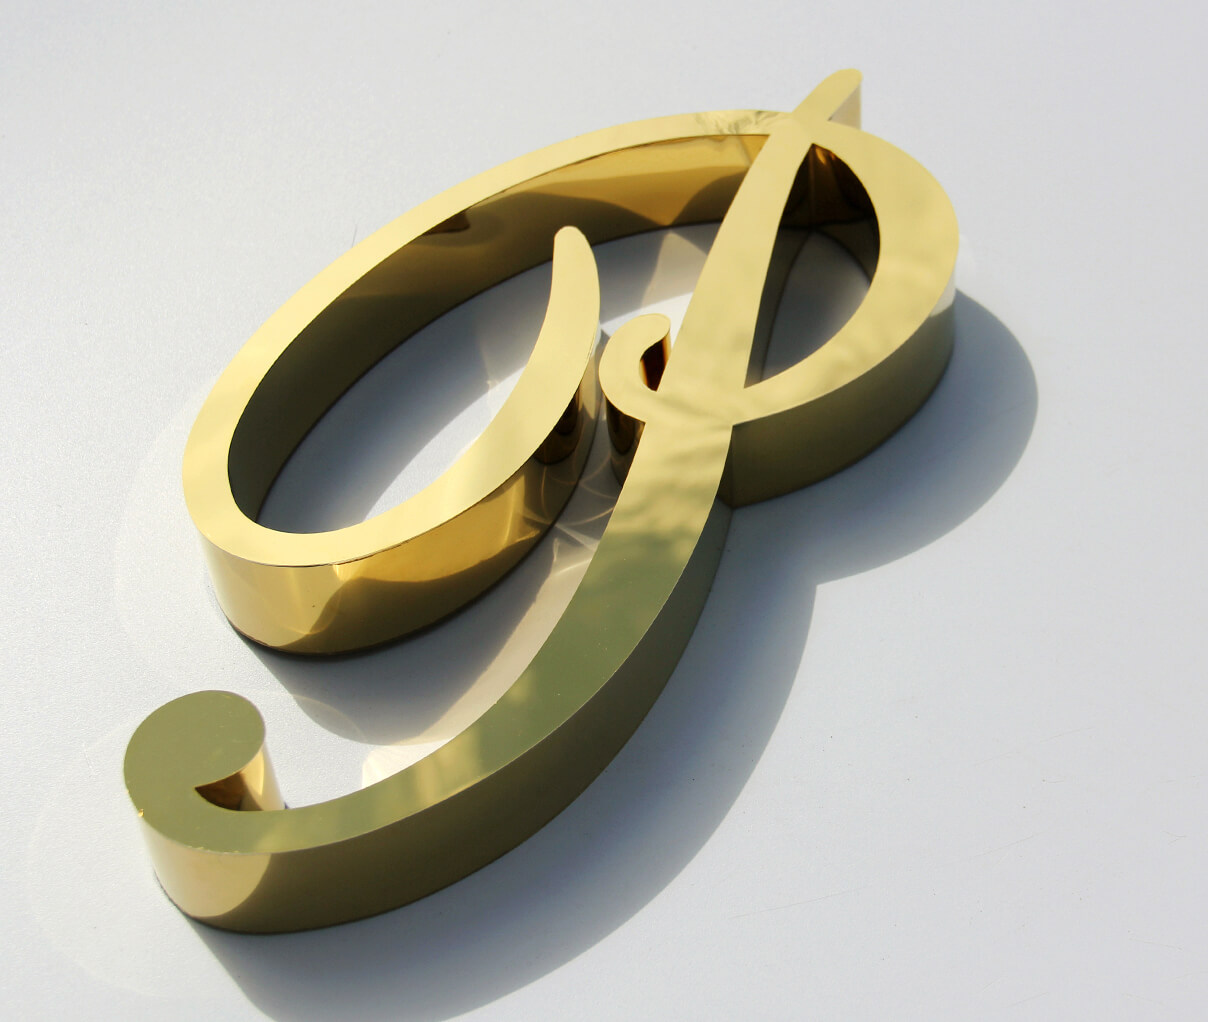 Letters P in gold - Gold letter P made of stainless steel.